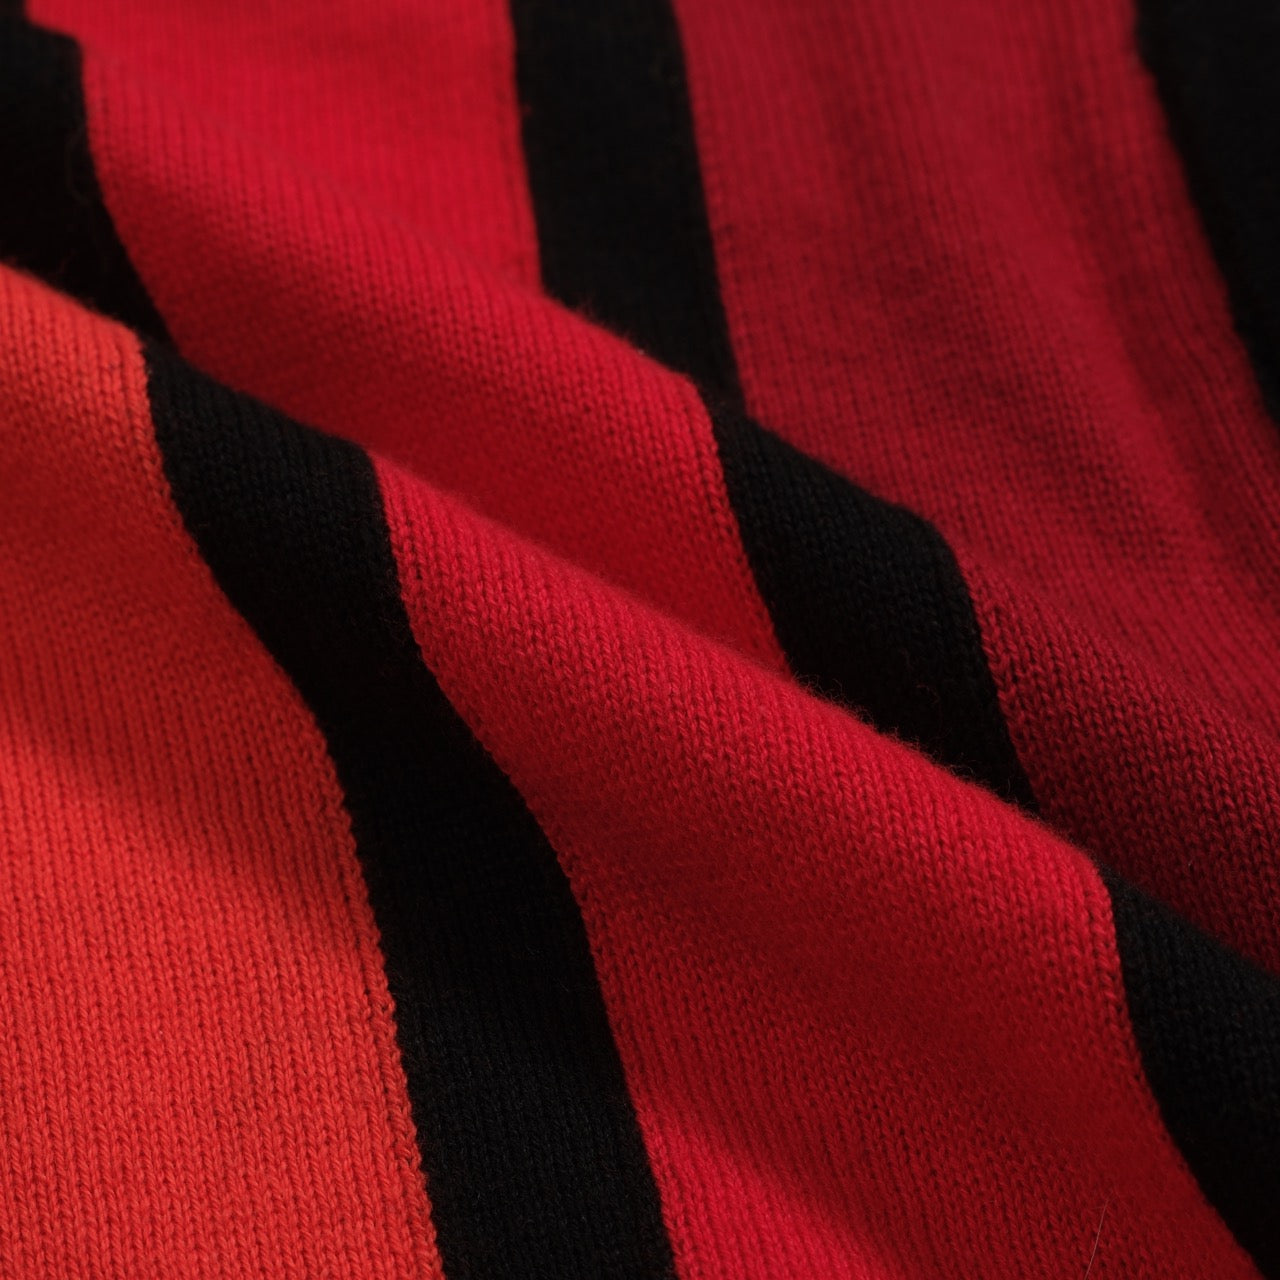 Men's Black & Red Cardigan Vertical Stripes Knitted Polo